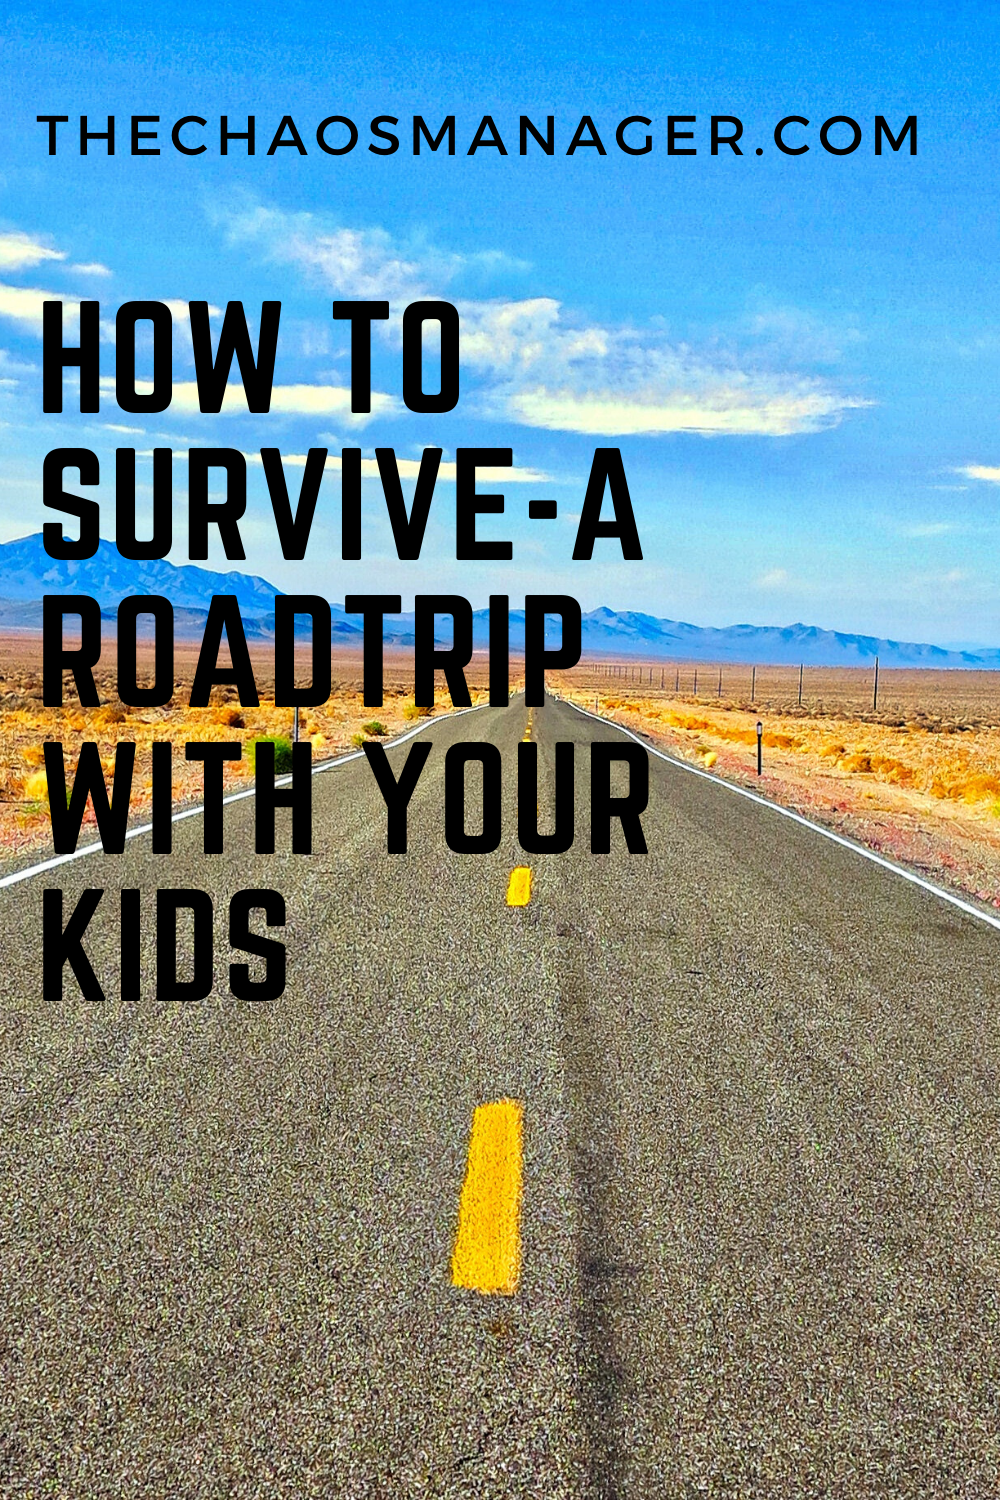 Road trip with kids